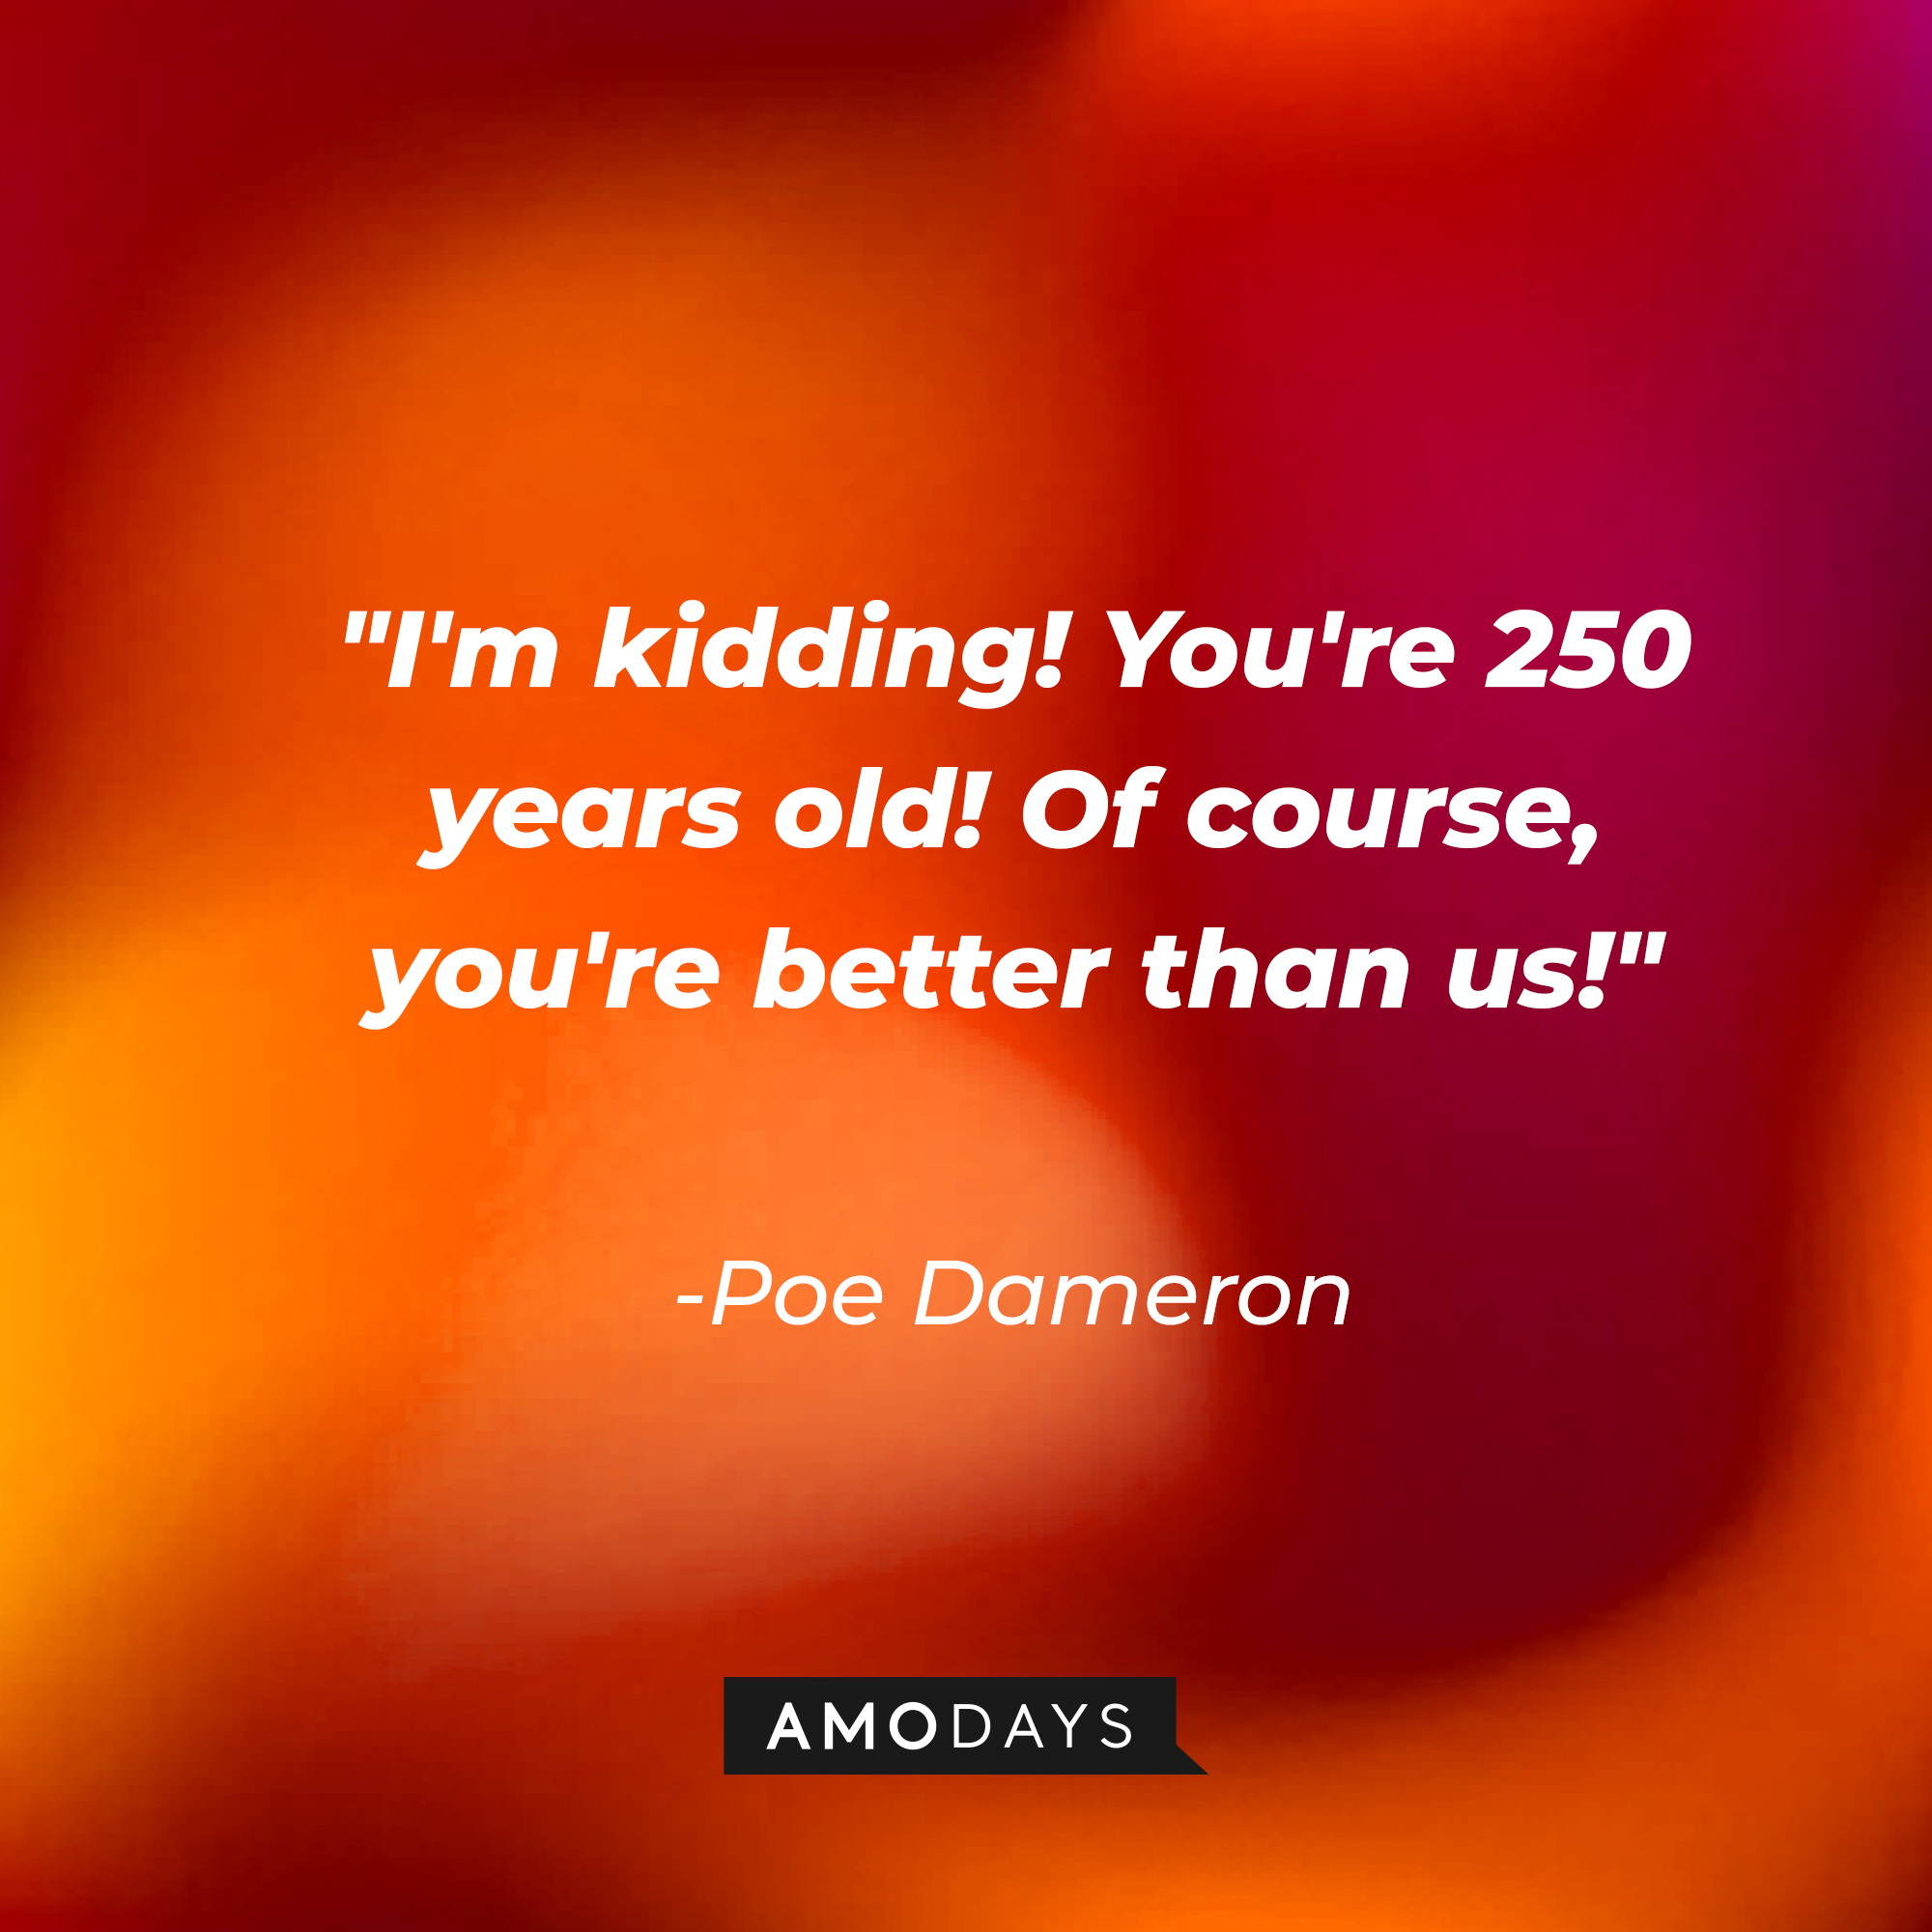 Poe Dameron's quote: "I'm kidding! You're 250 years old! Of course, you're better than us!" | Source: AmoDays